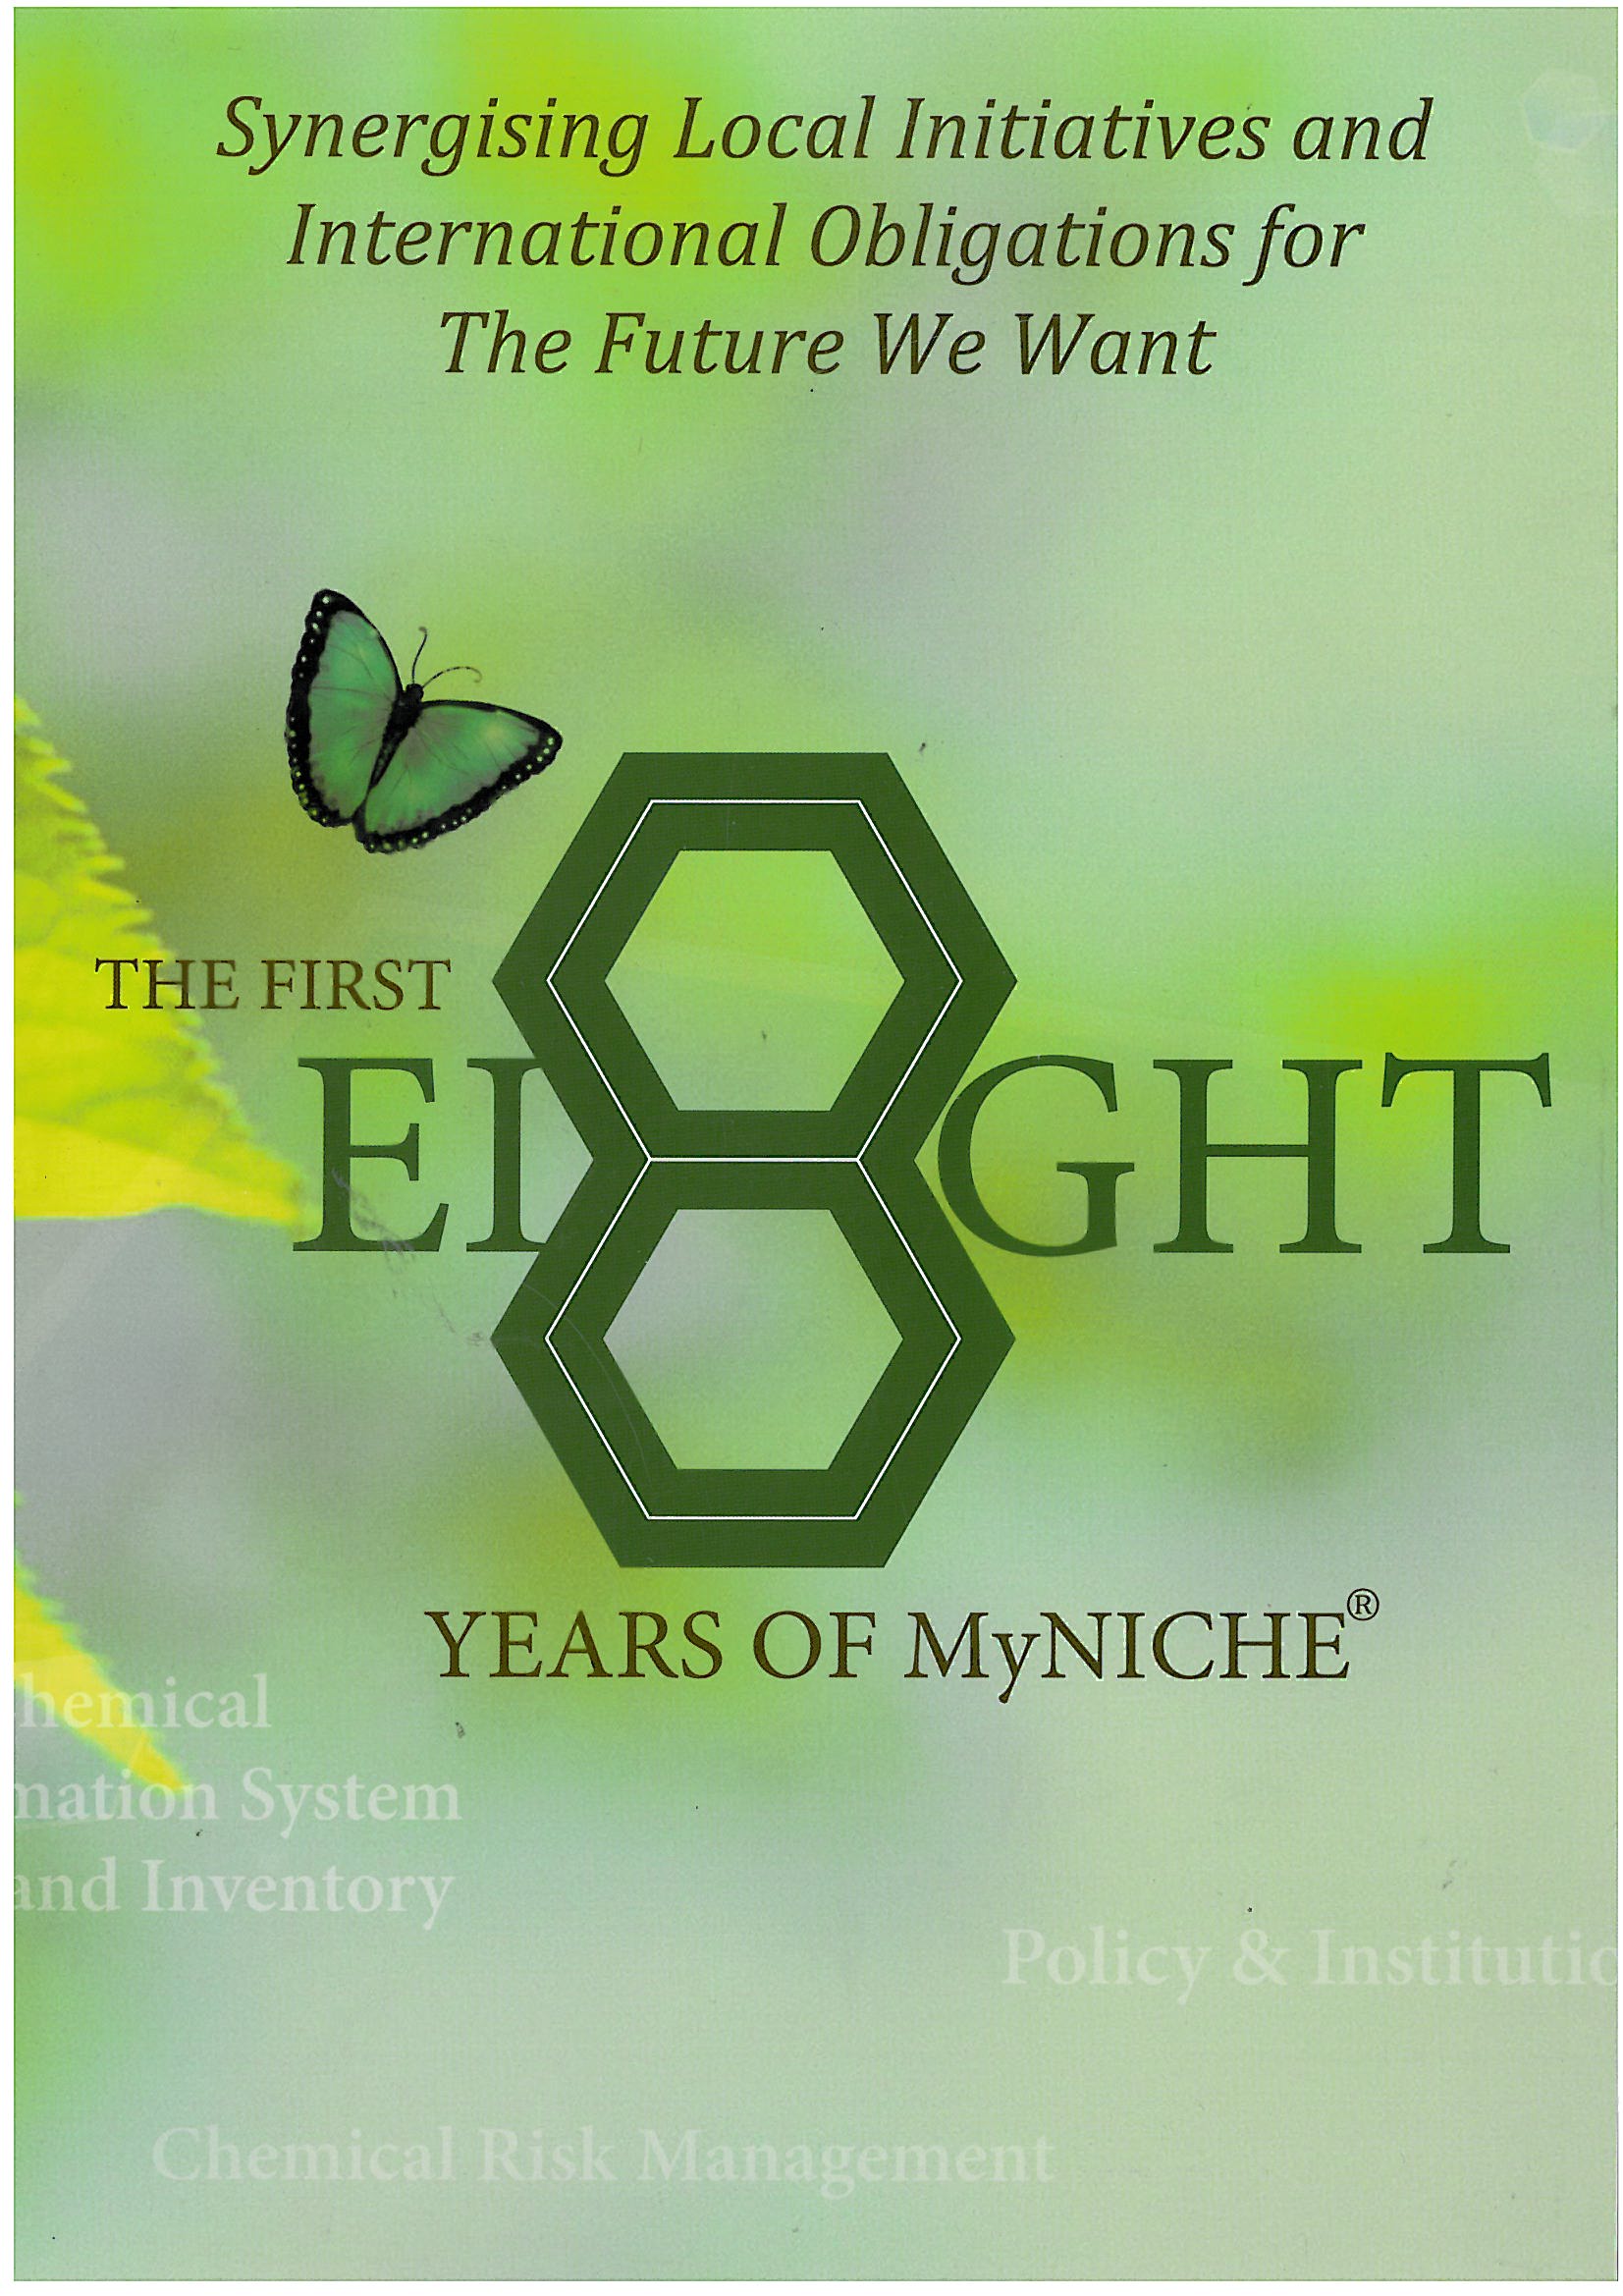 Synergising Local Initiatives and International Obligations for The Future We Want (MyNICHE-8)